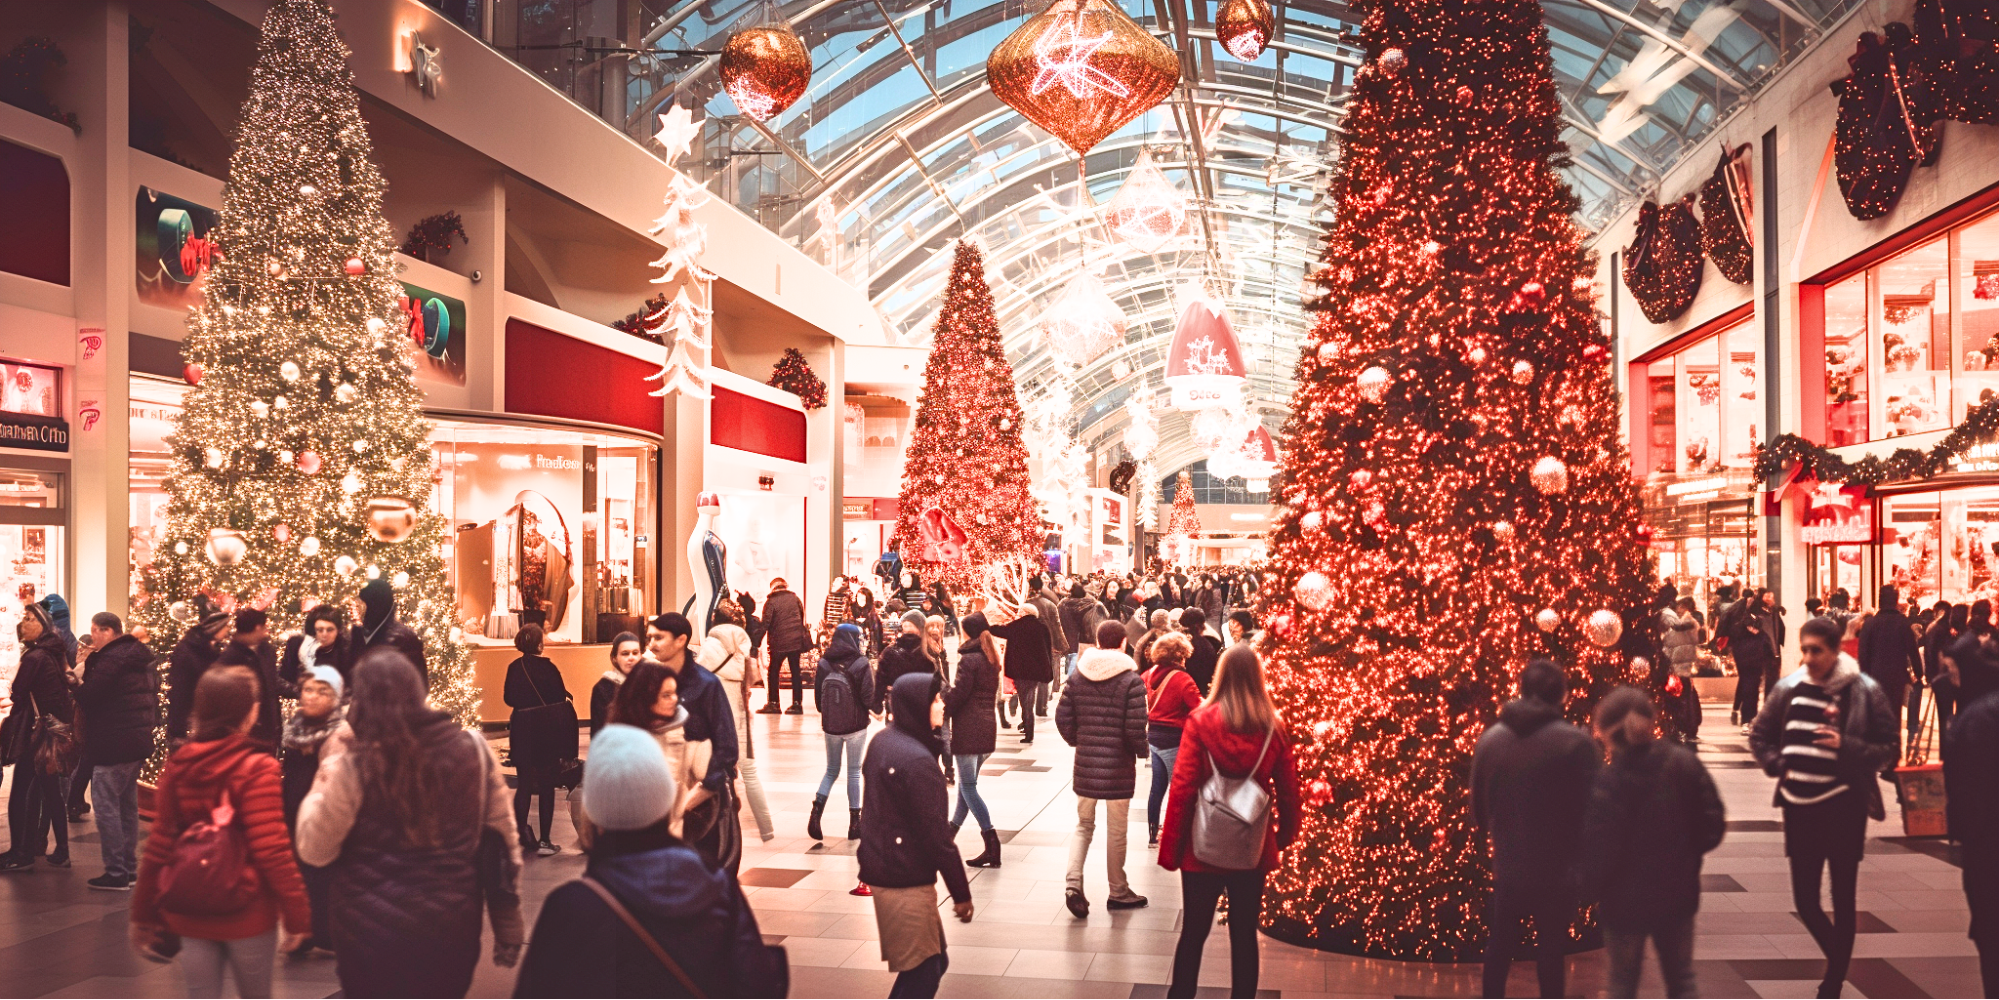 A scene at a bustling mall during the holiday season, capturing the energetic environment with people shopping amidst holiday-themed decorations.